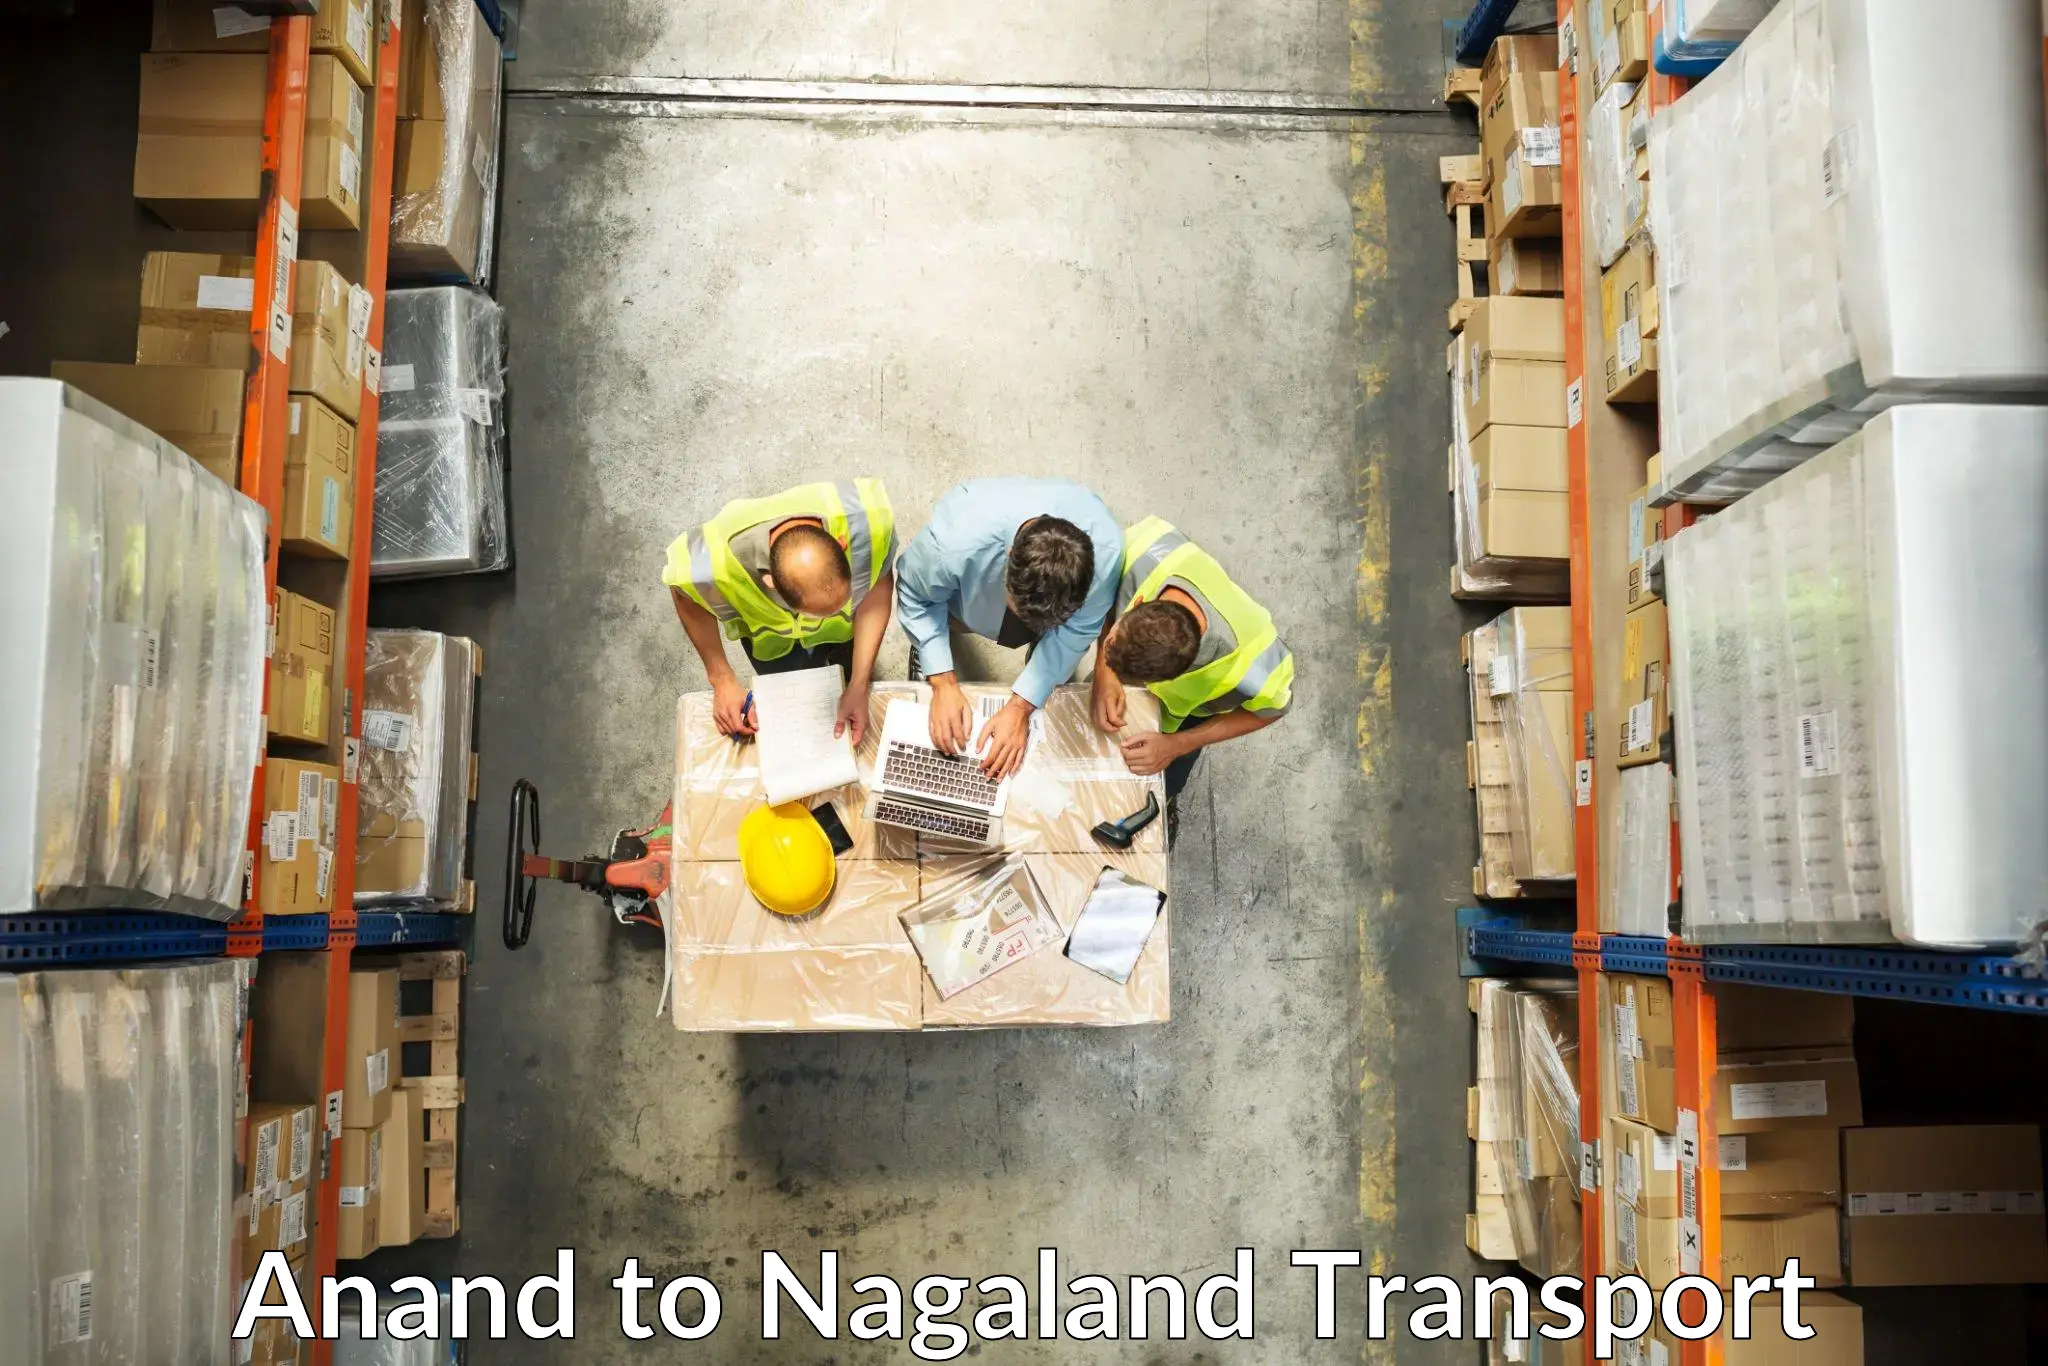 Online transport service Anand to Nagaland